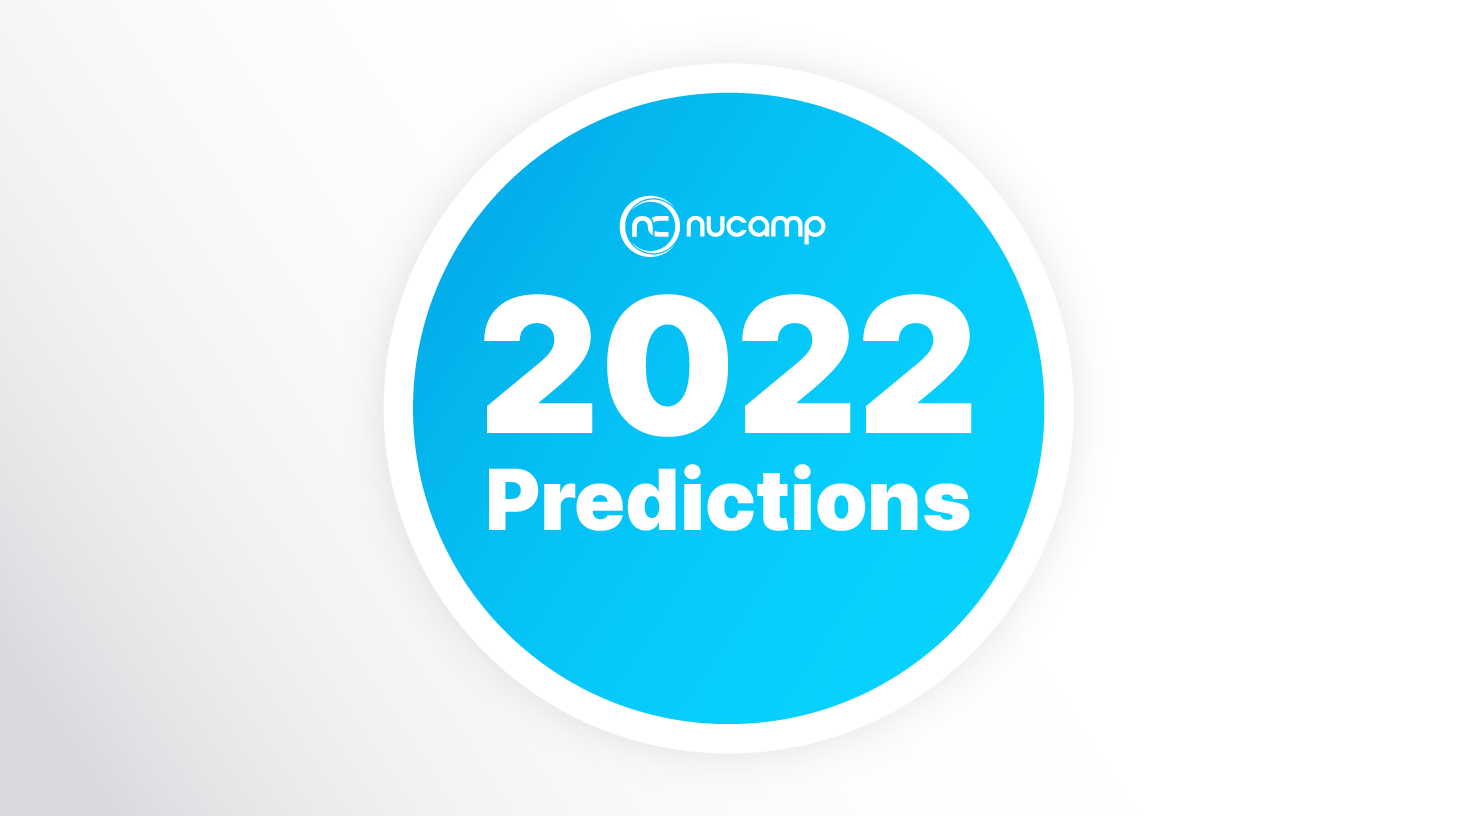 Nucamp's tech education industry Predictions for 2022 